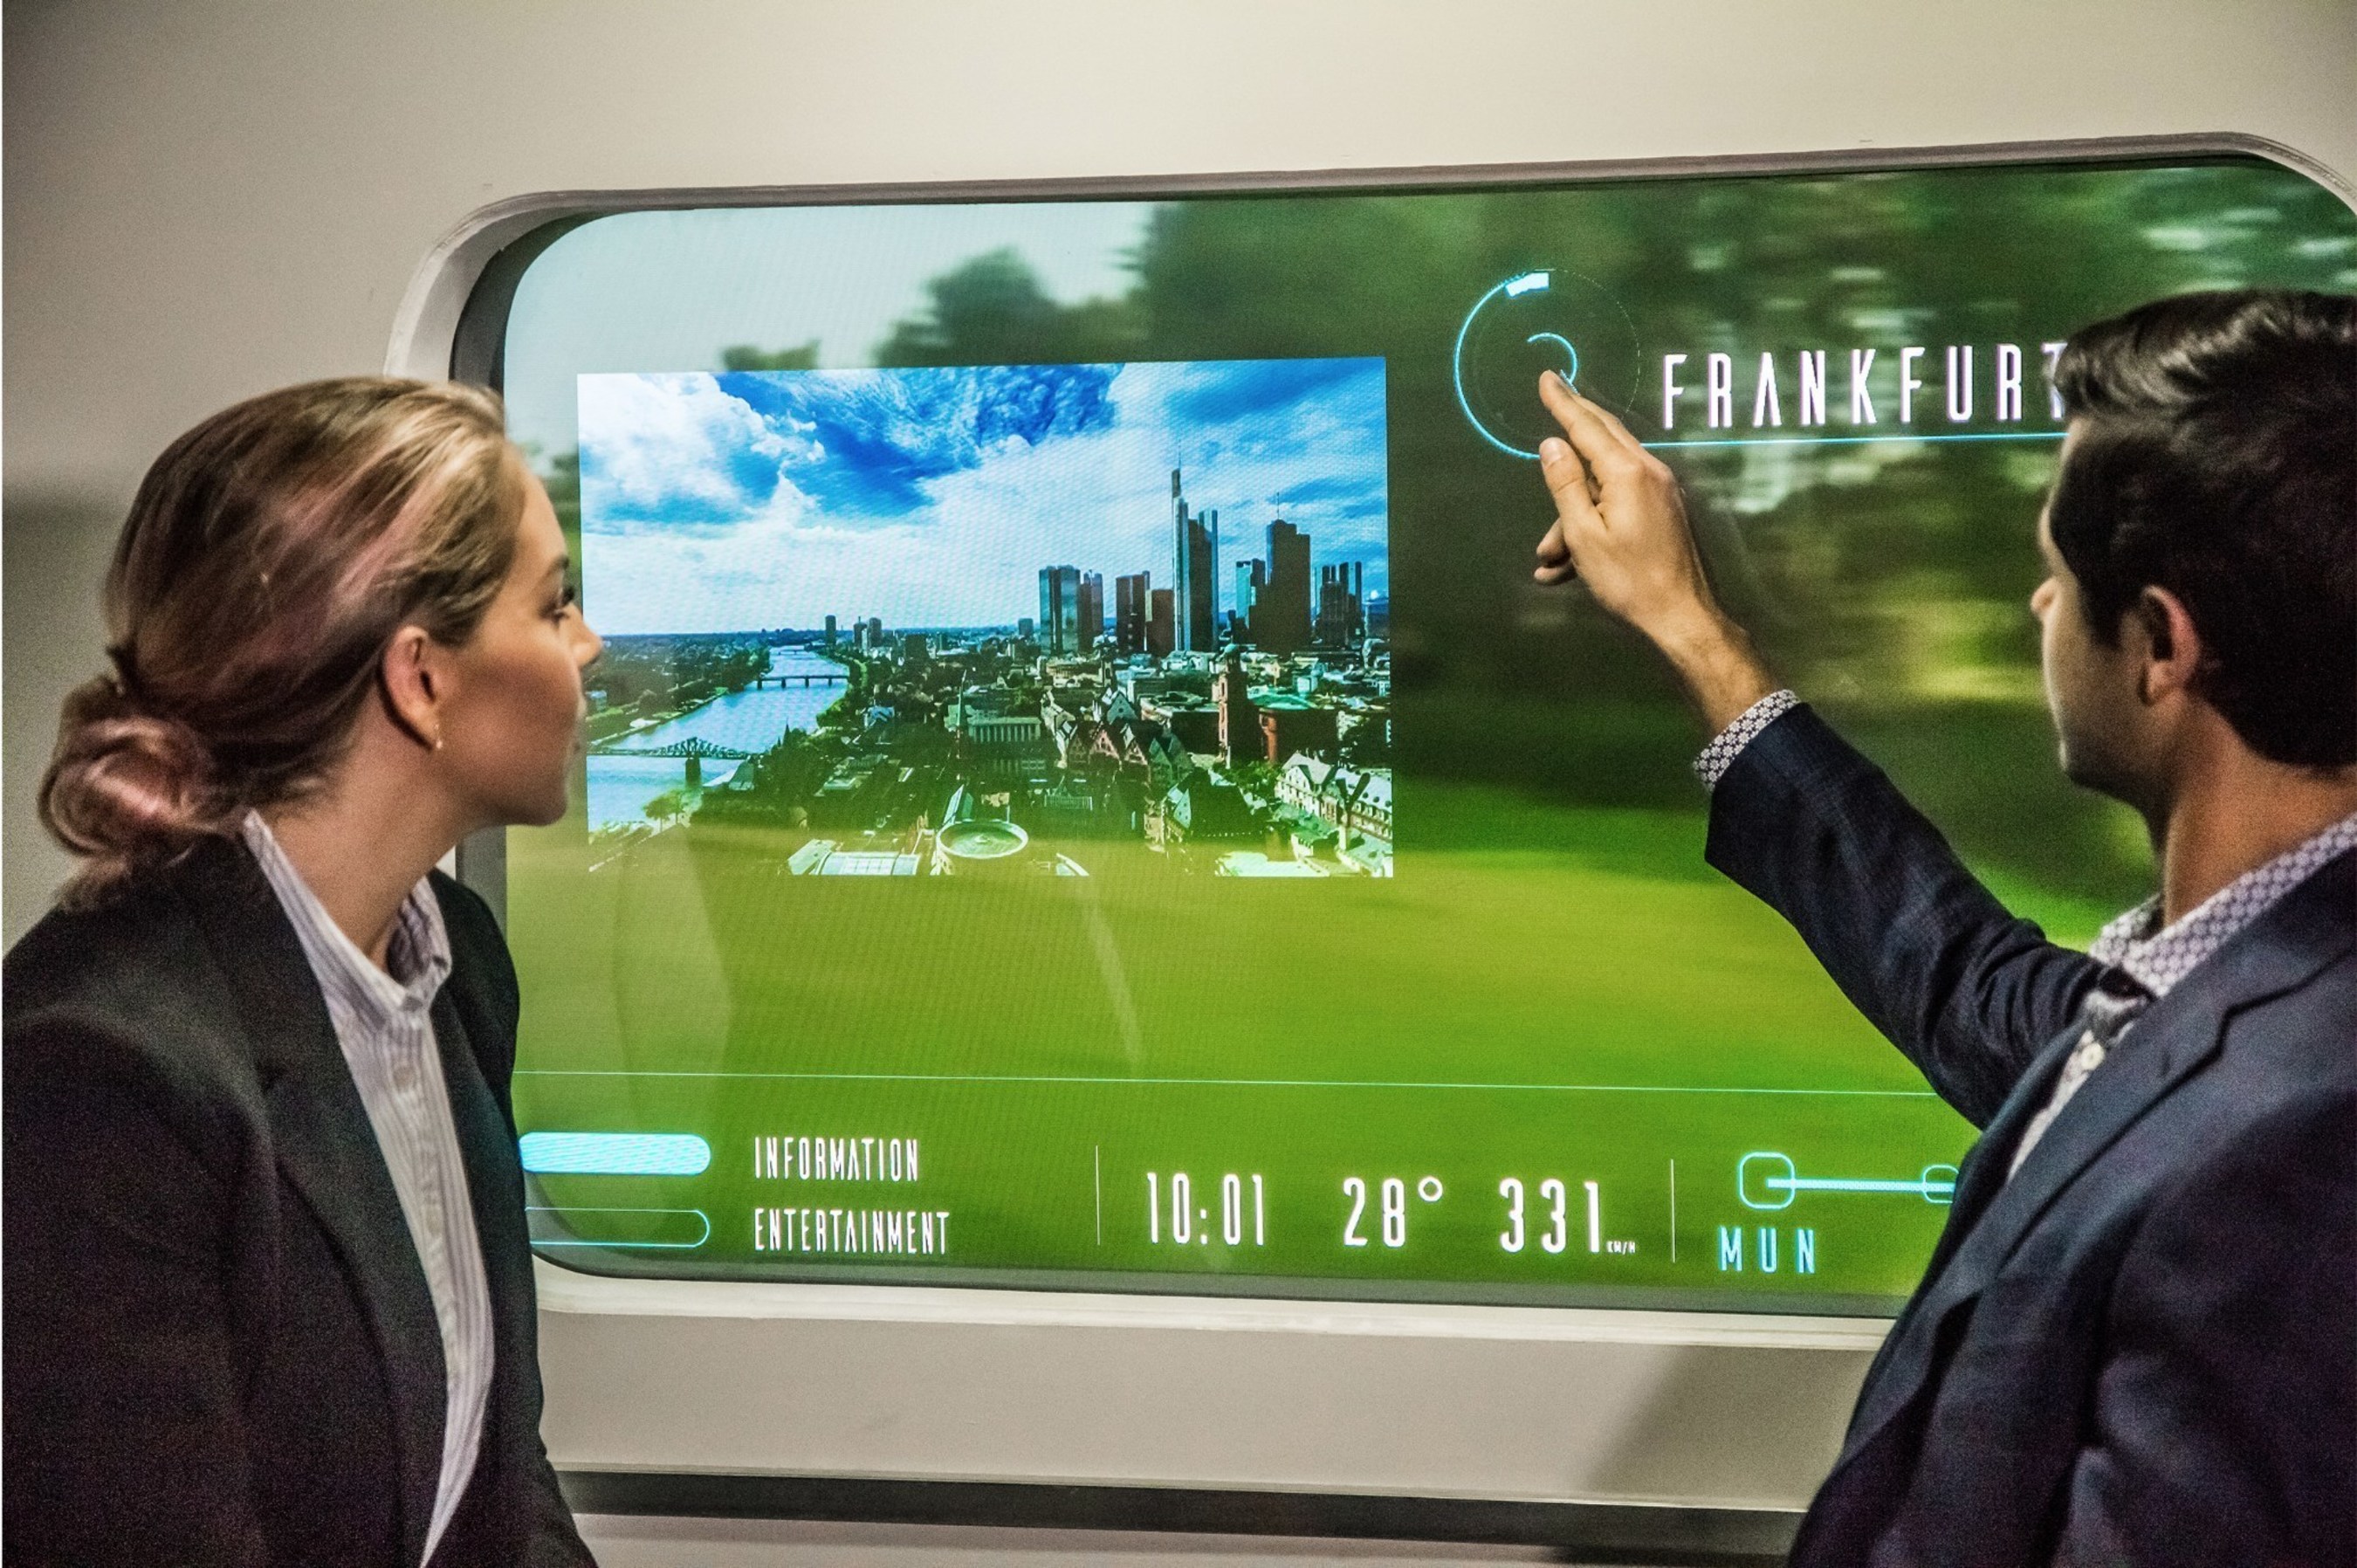 Hyperloop Augmented Reality Windows for the Innovation Train